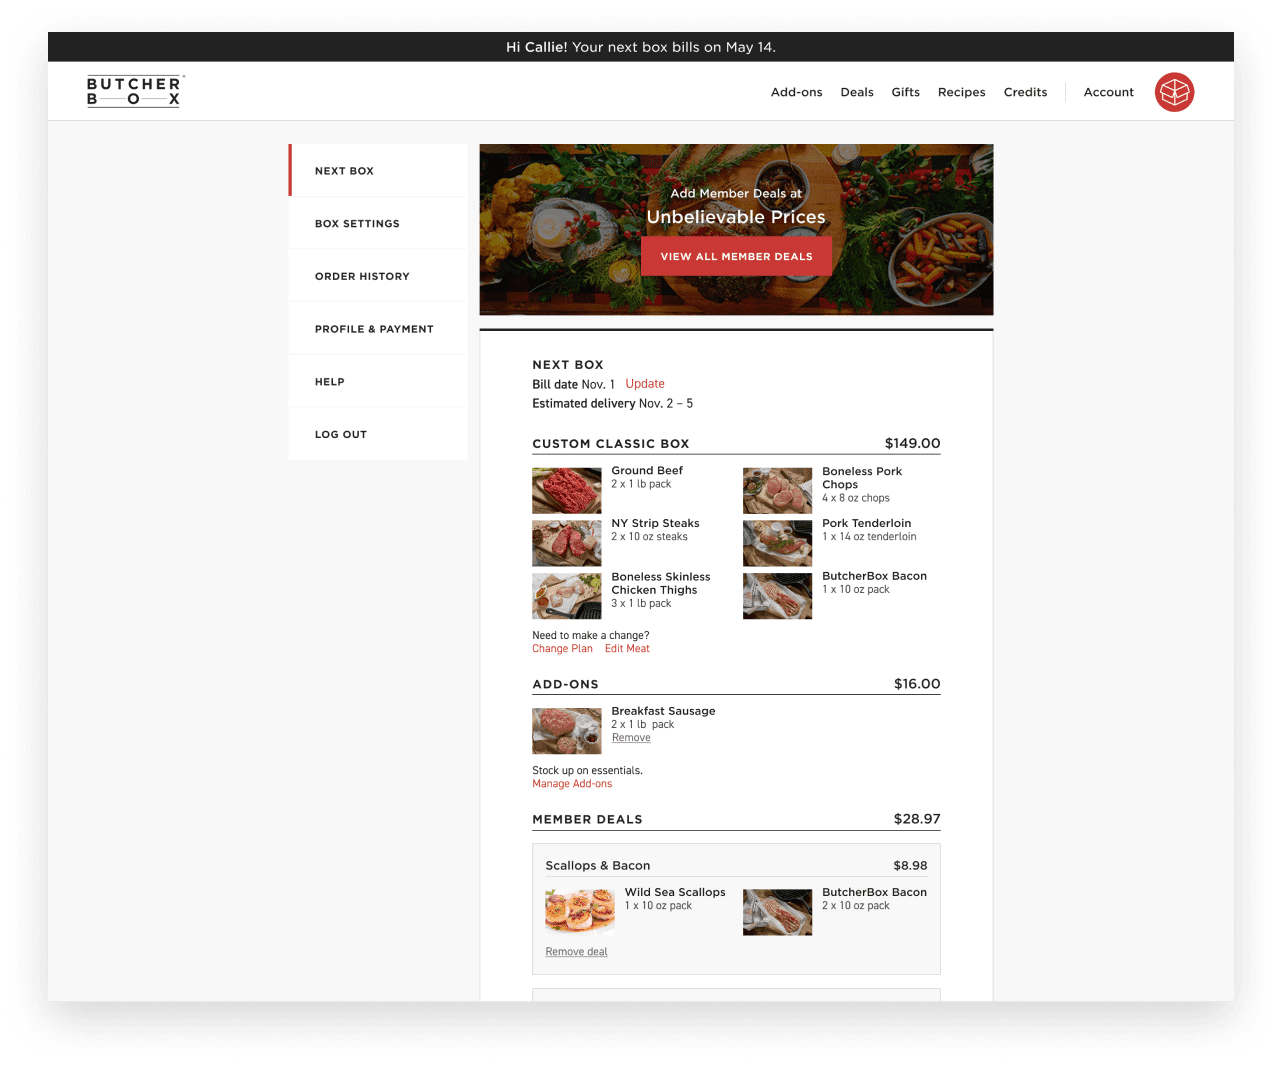 ButcherBox members can easily manage all aspects of their next box including bill date, custom box cuts, member deals, add-ons and for life offers on the next box screen.